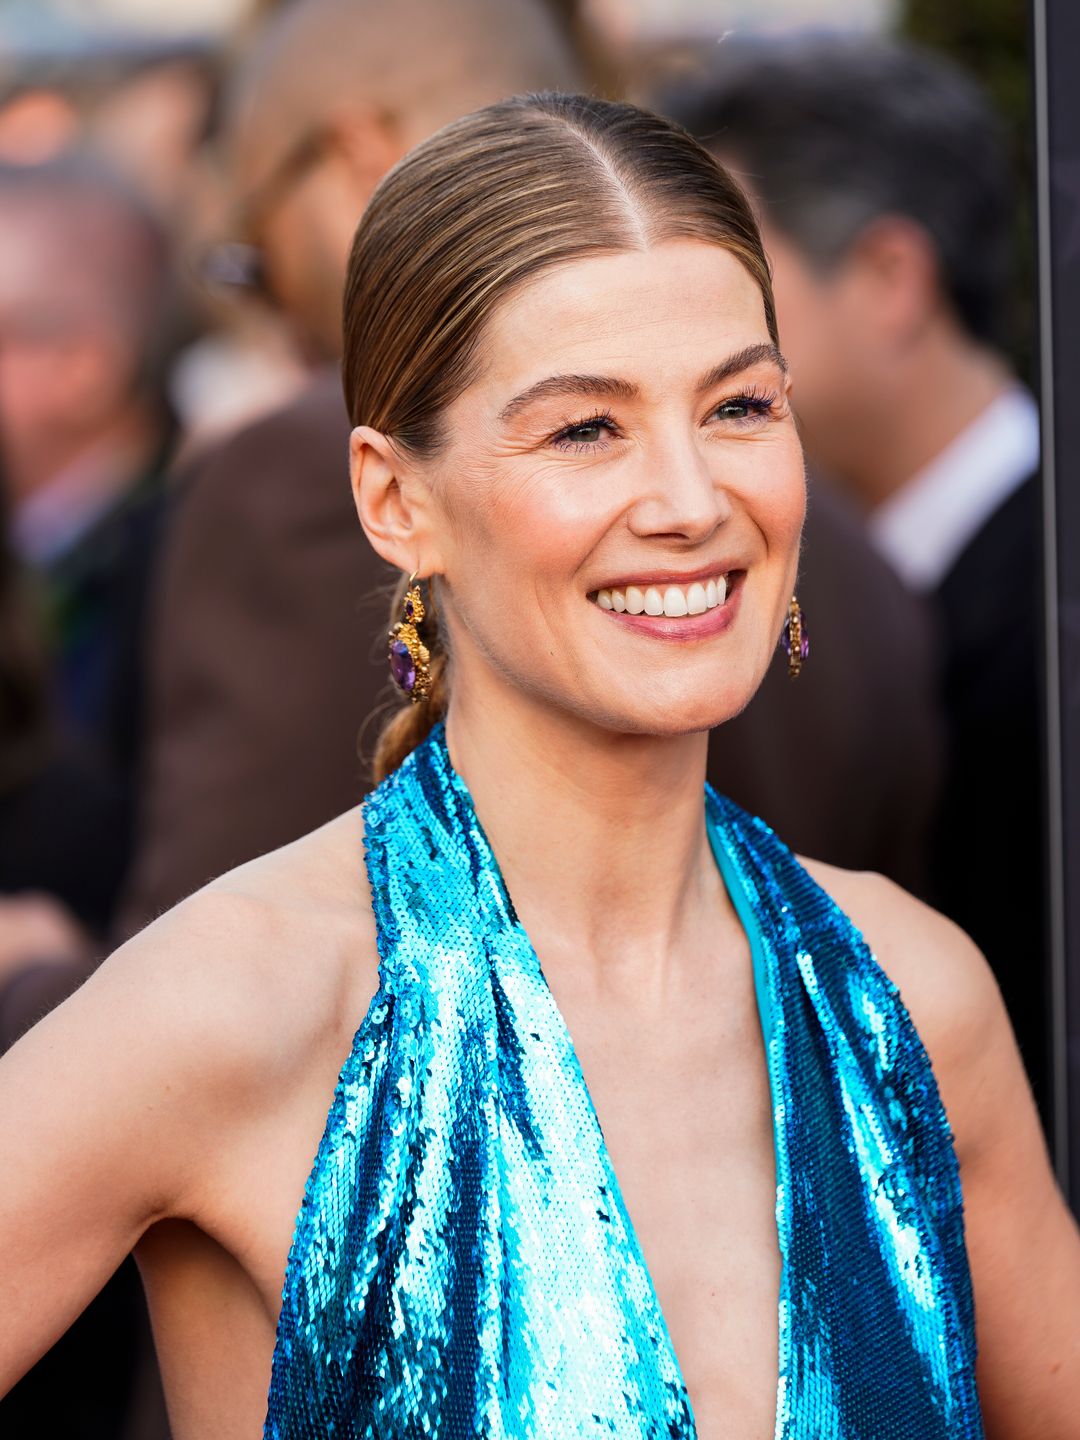 Rosamund Pike smiling on the red carpet at the Critics' Choice Awards 